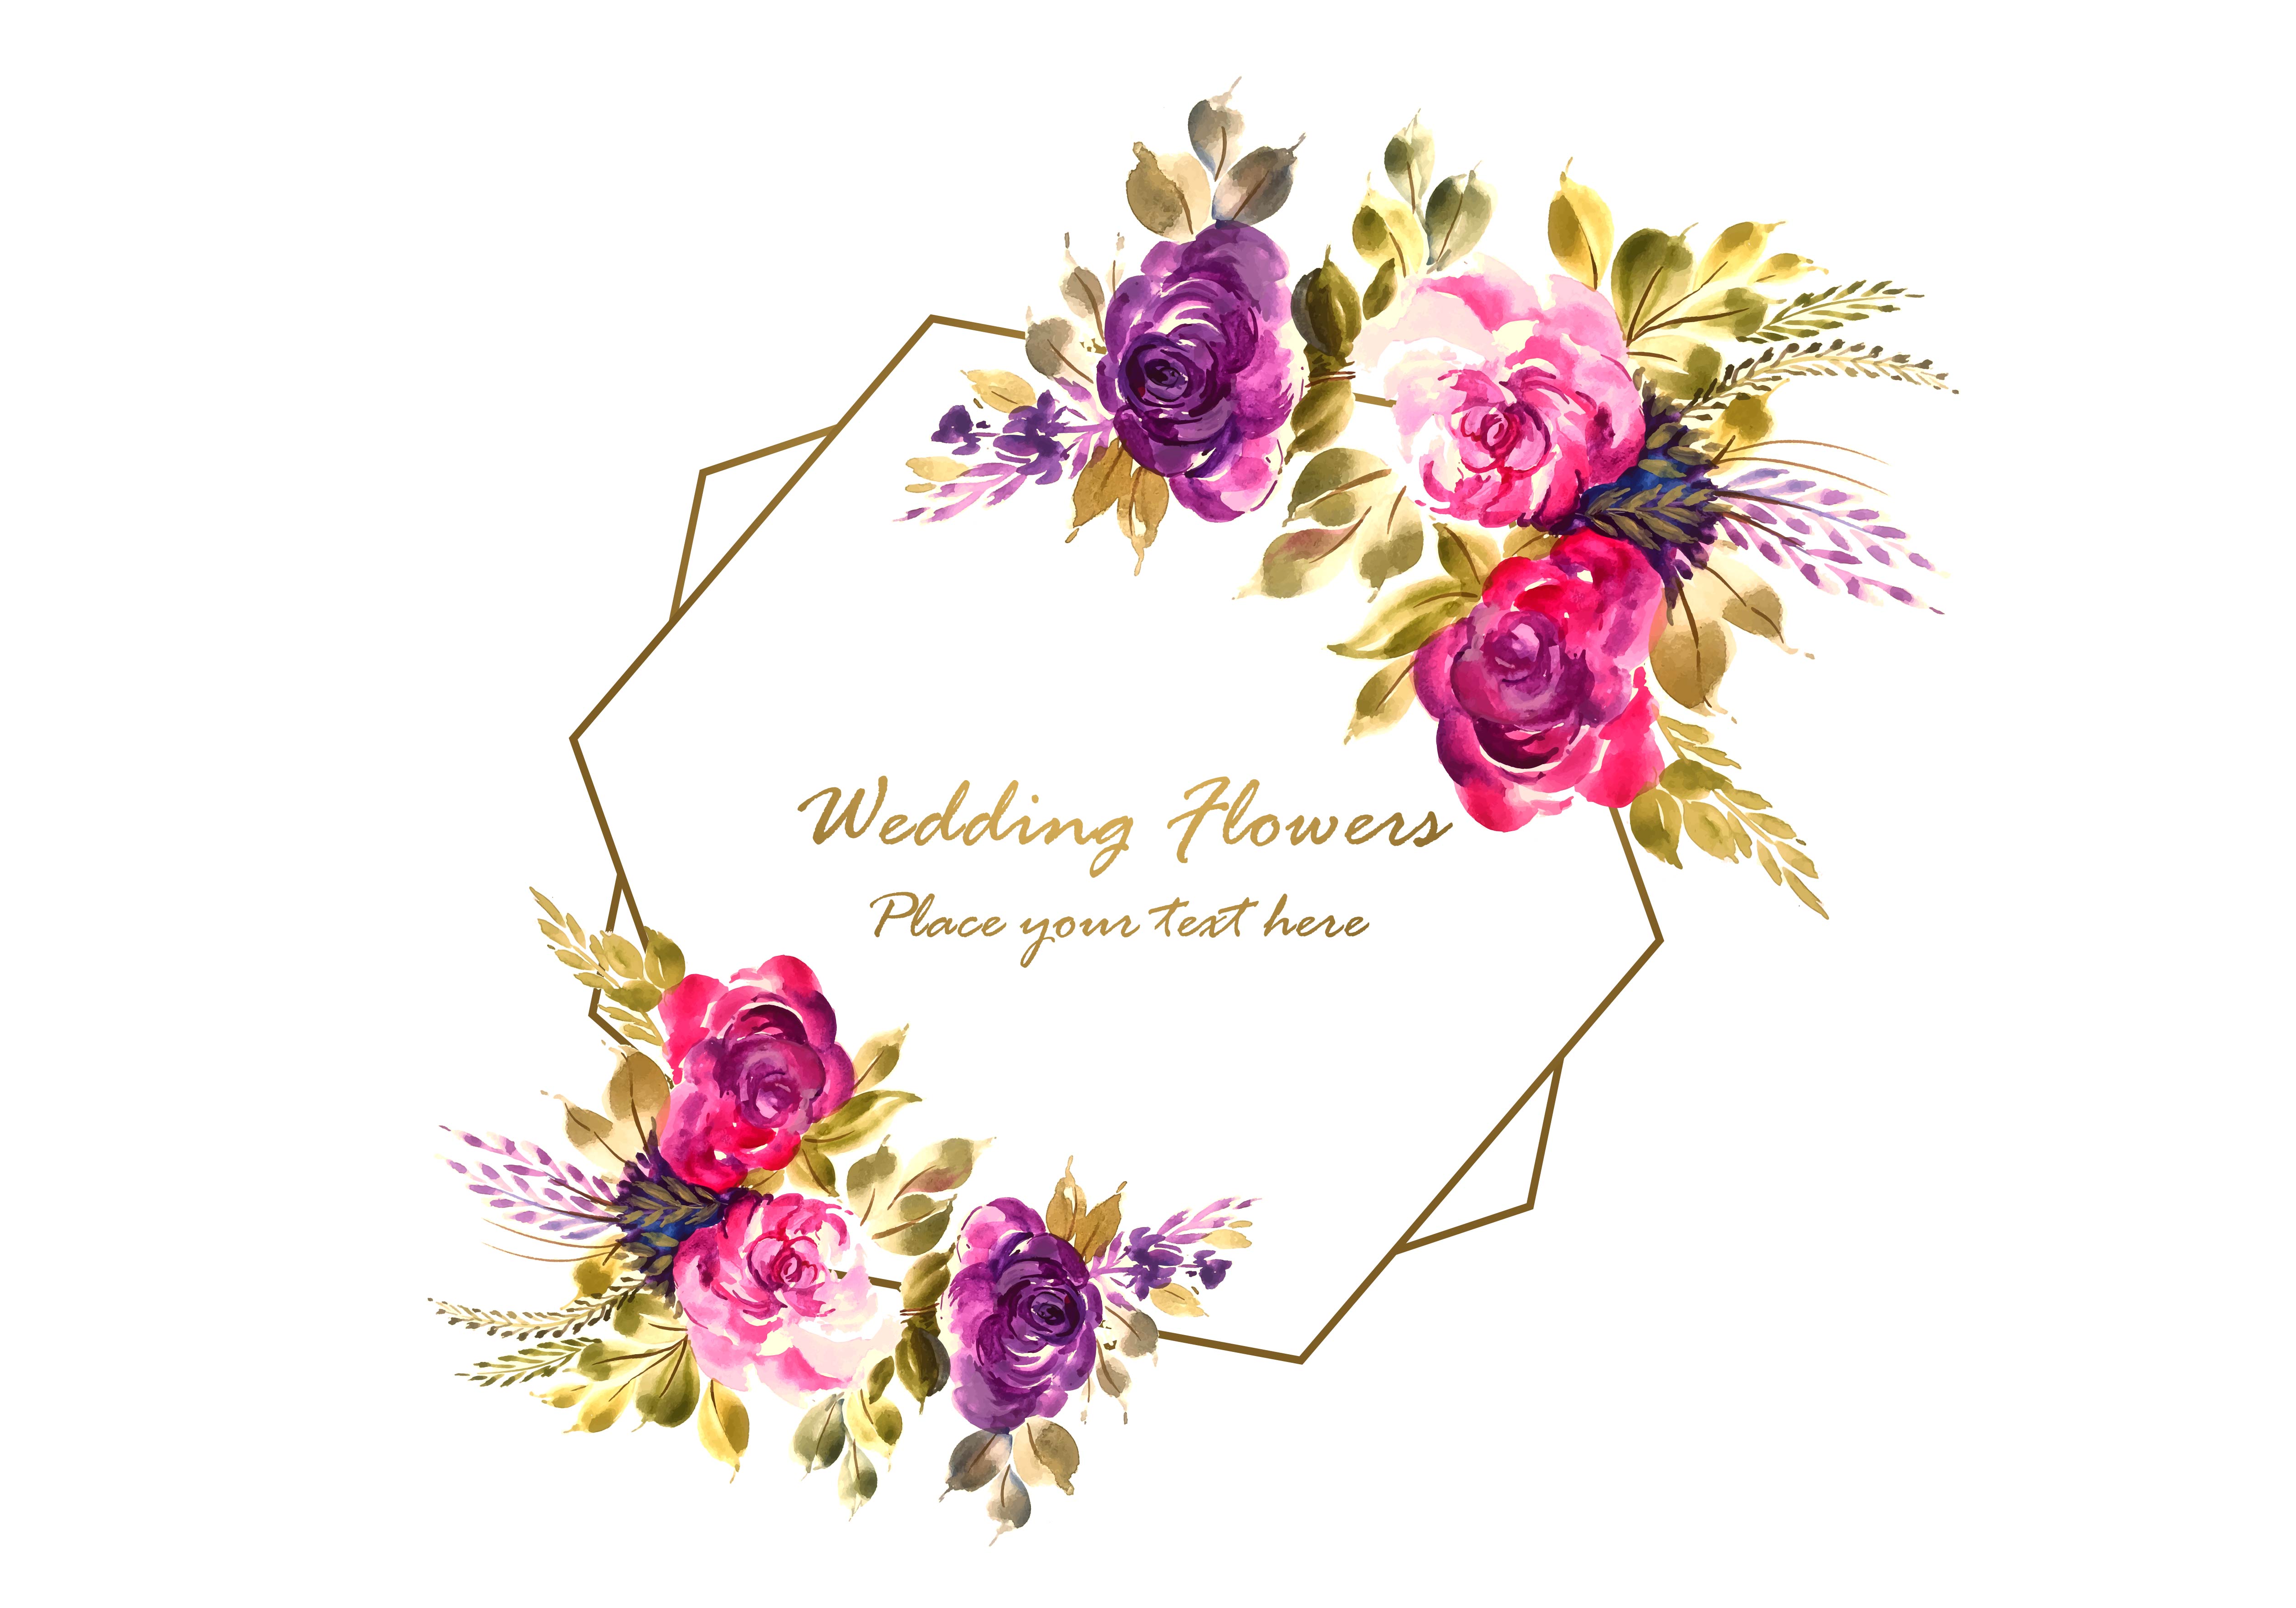 flowers frame with wedding card background - download free